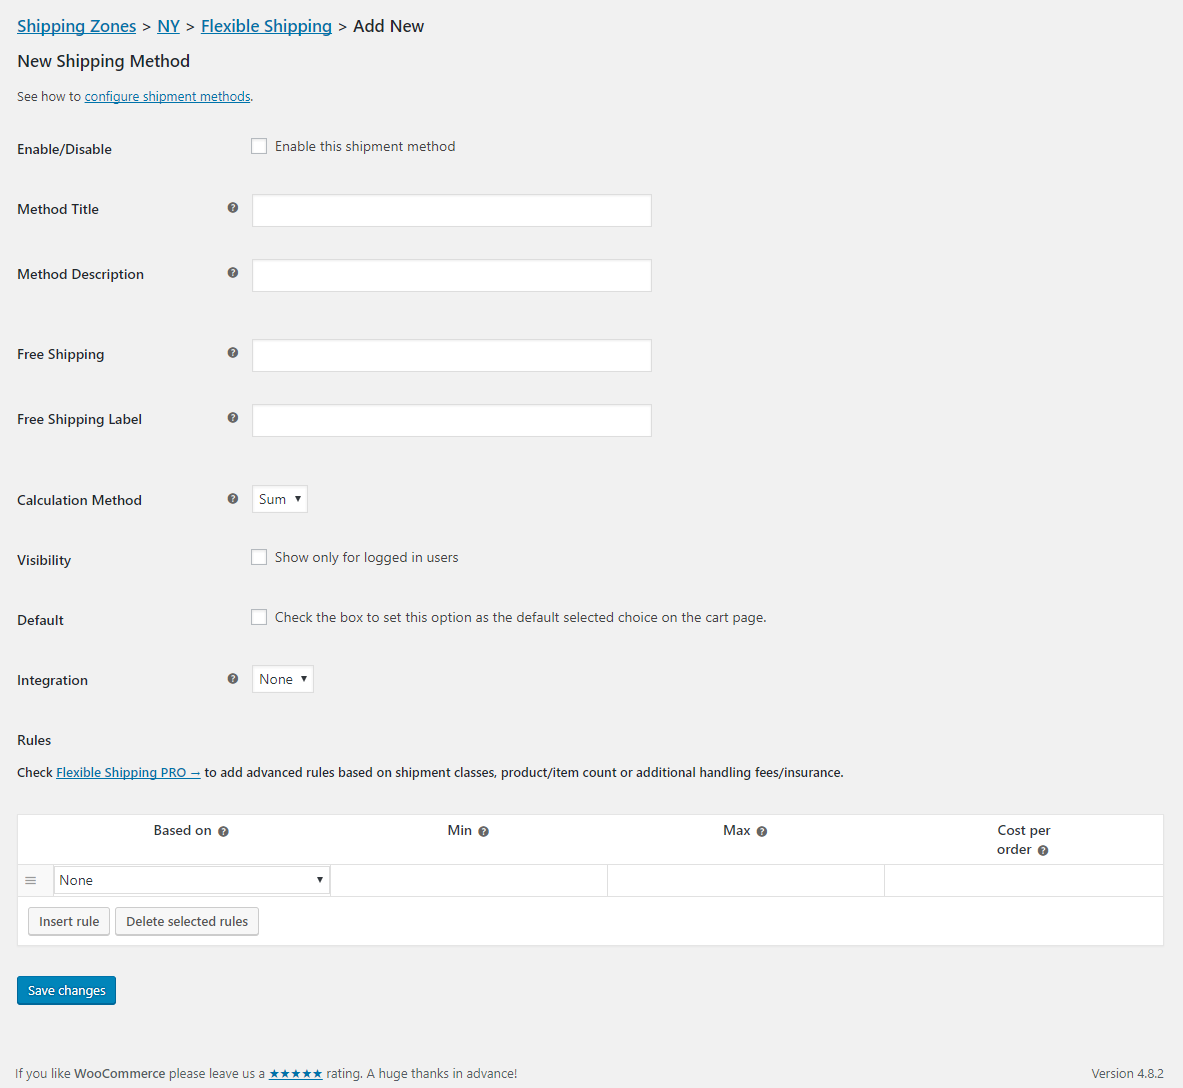 You can create any number of flexible shipping methods using this plugin